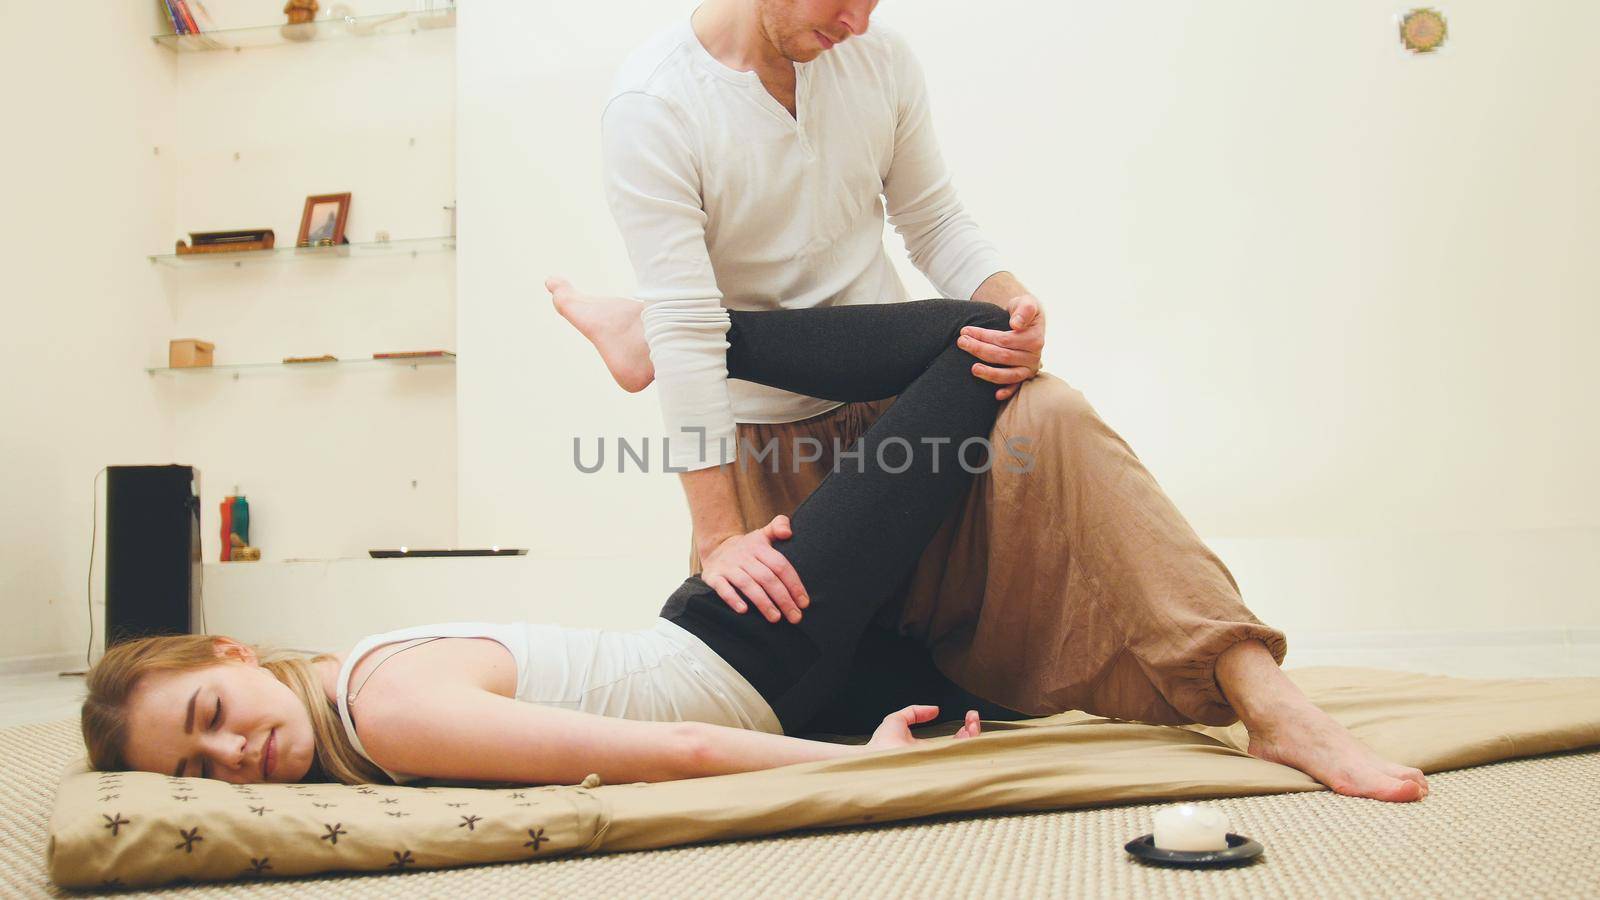 Thai traditional therapy for the spine and legs - shocking strong massage, horizontal